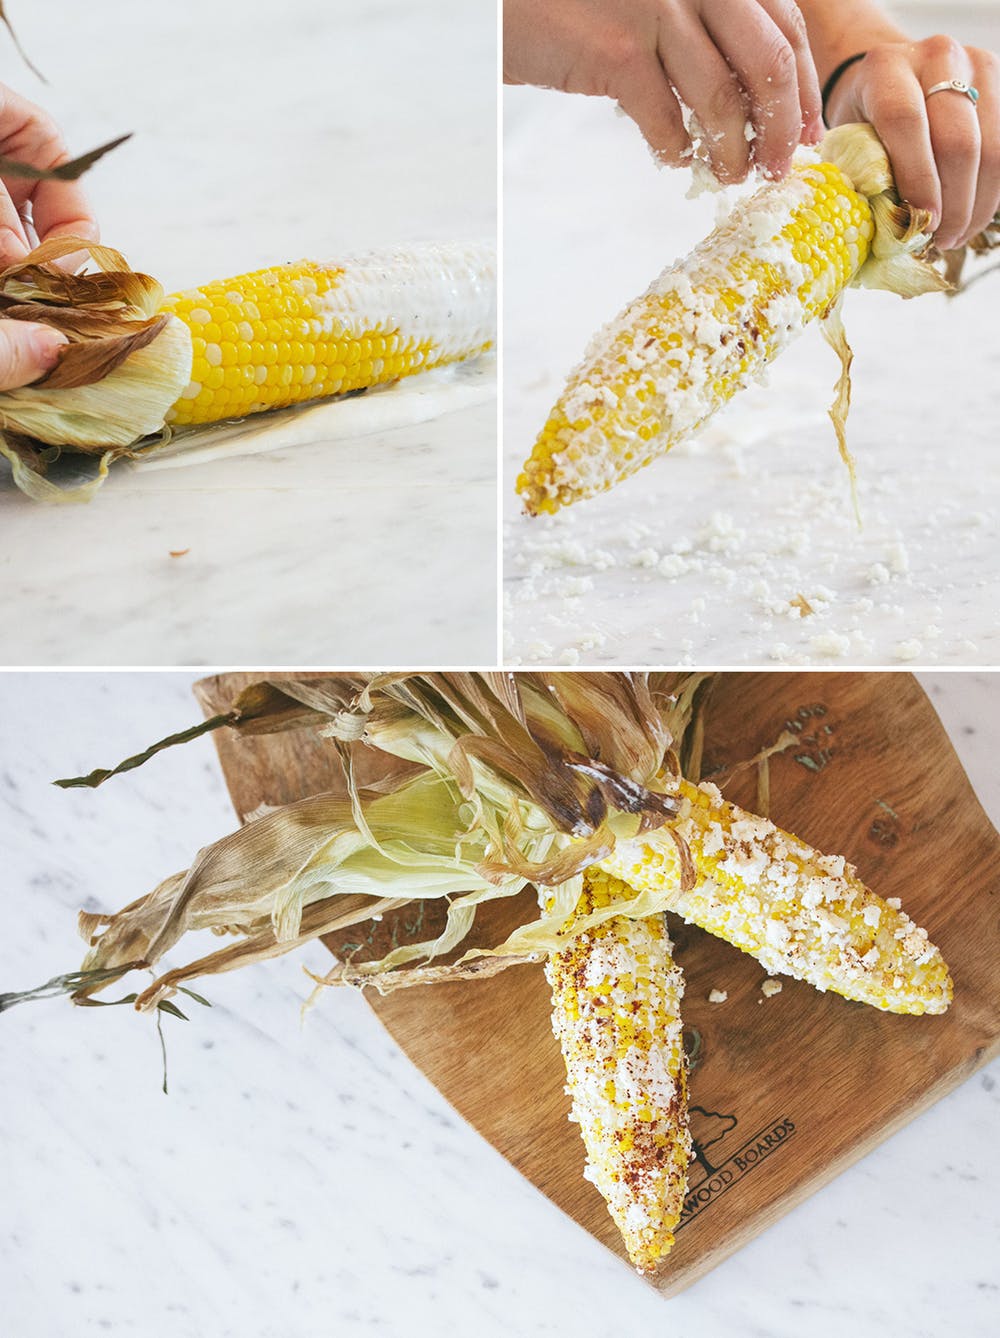 Mexican Style Street Corn